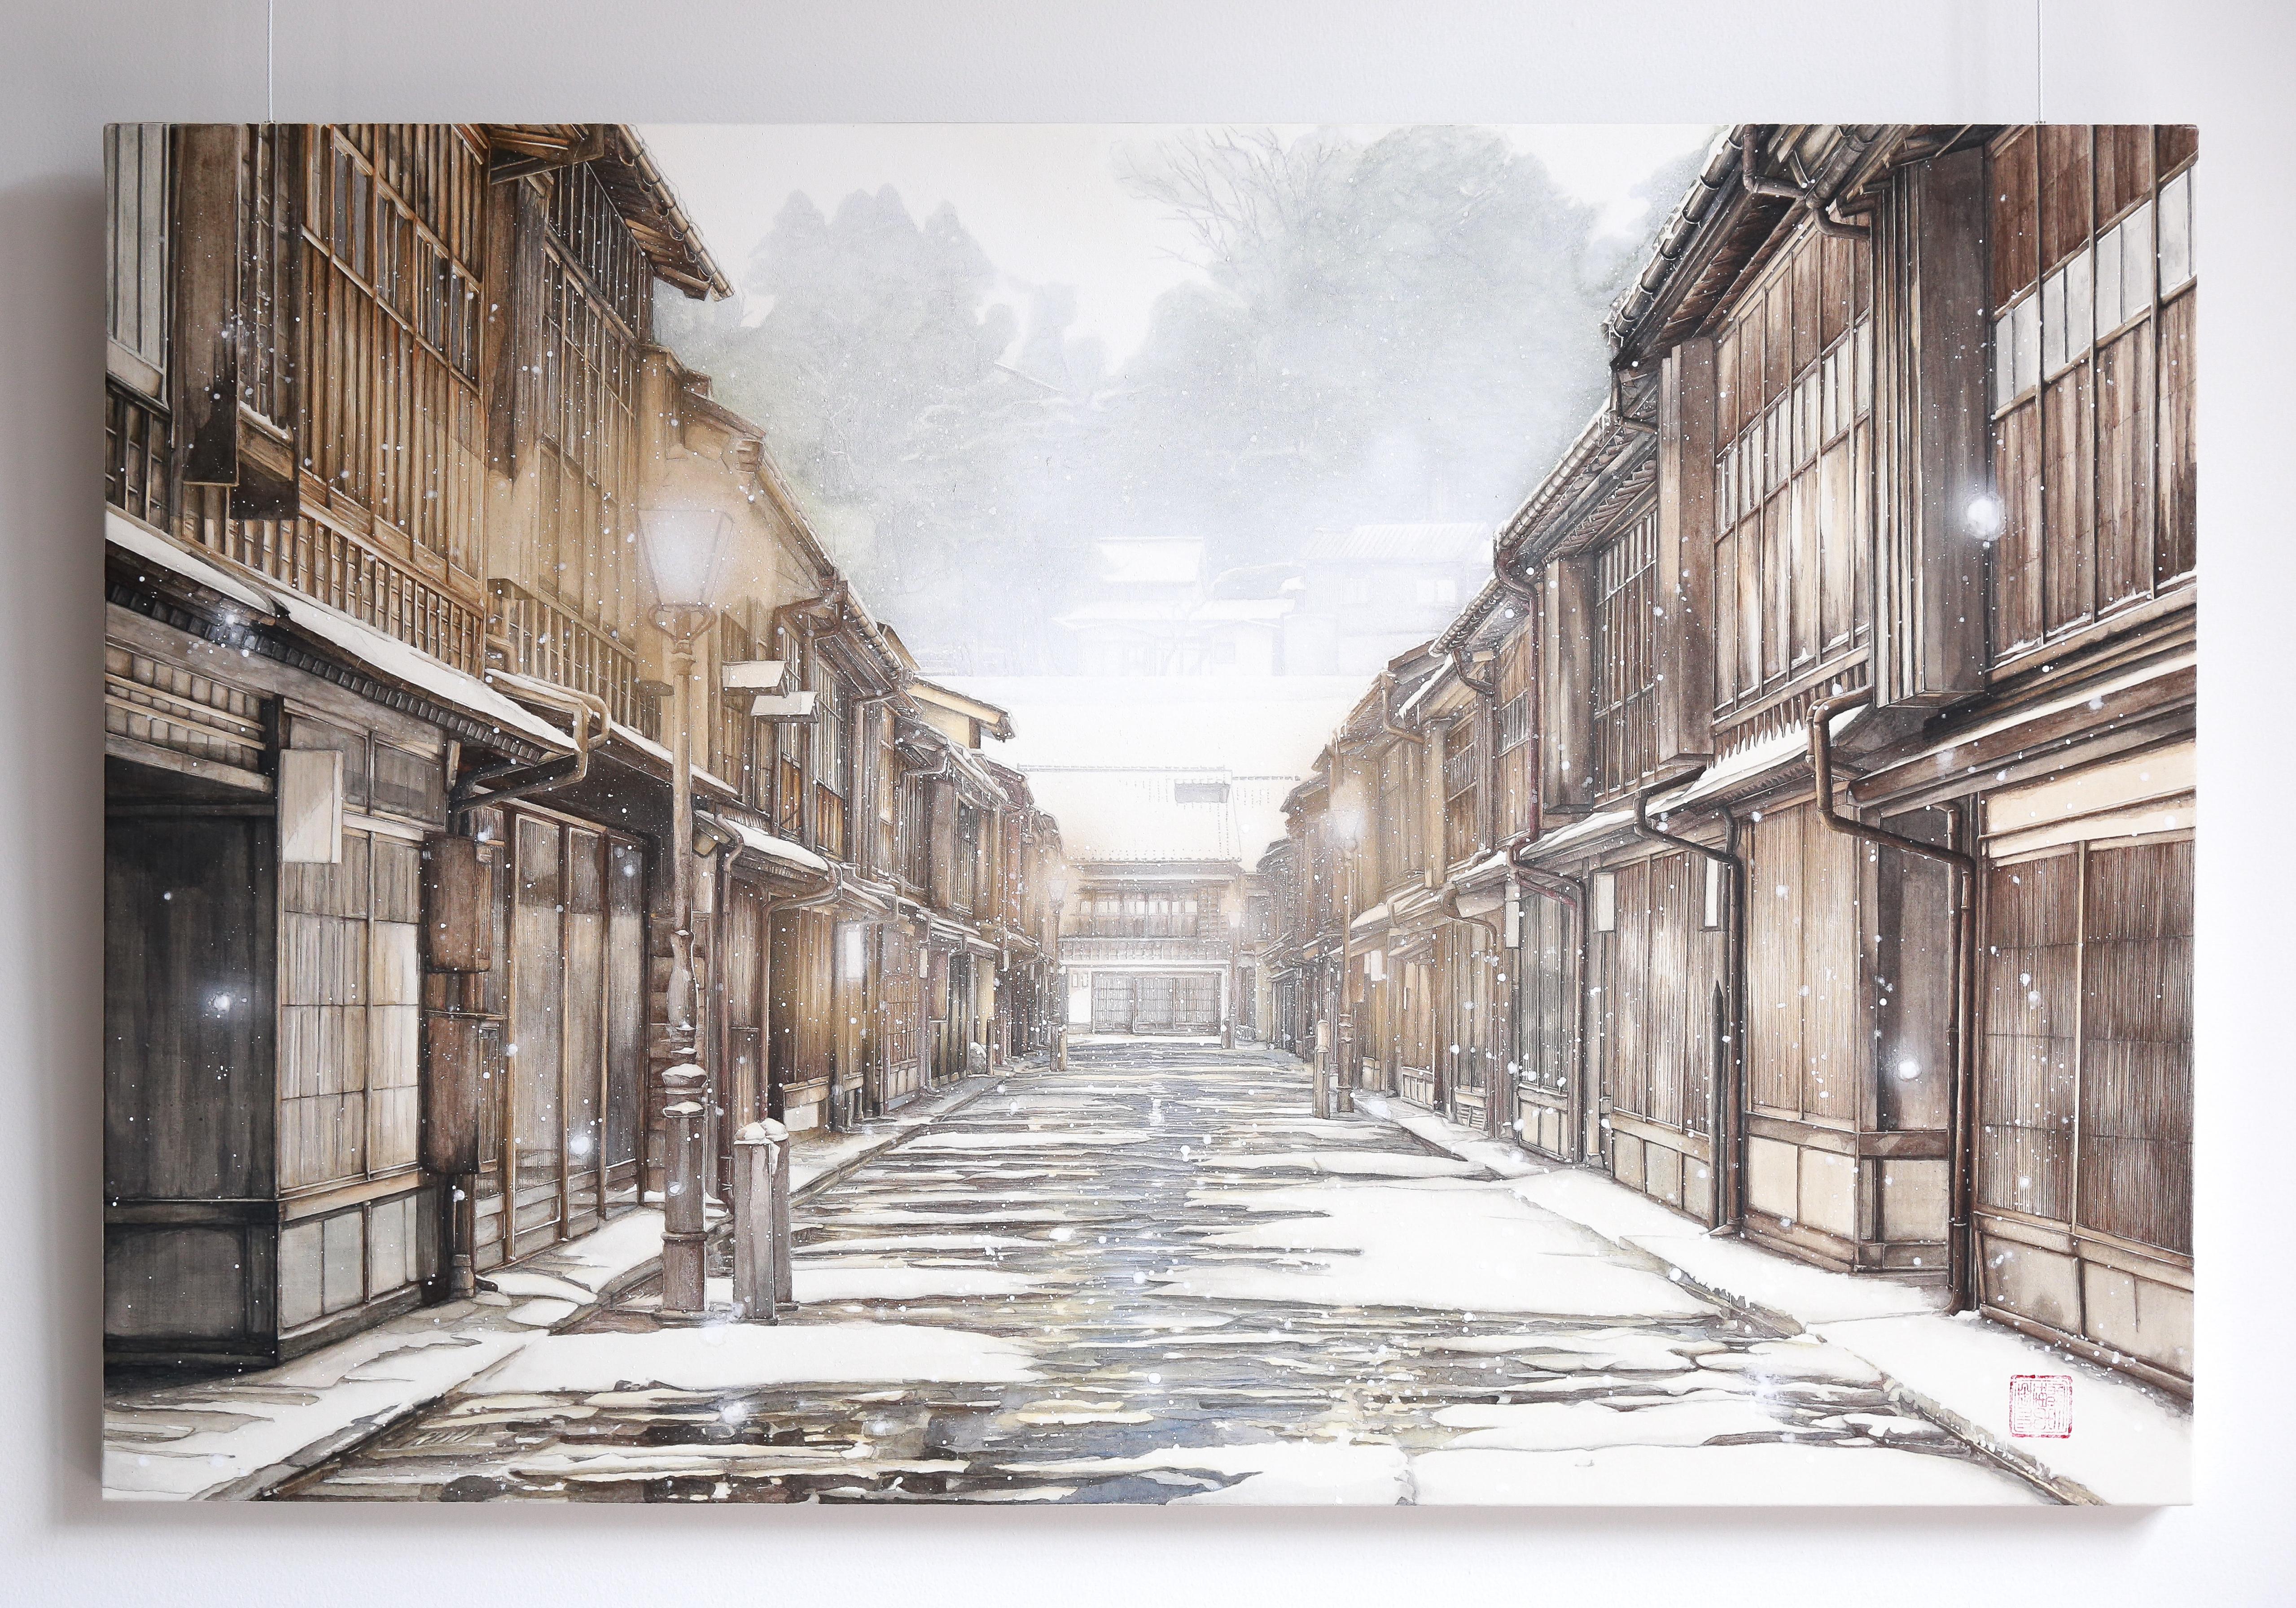 Kanazawa - Japanese Cityscape Painting in 24k Gold and Minerals, Realism, Winter - Gray Landscape Painting by Maria Mitsumori